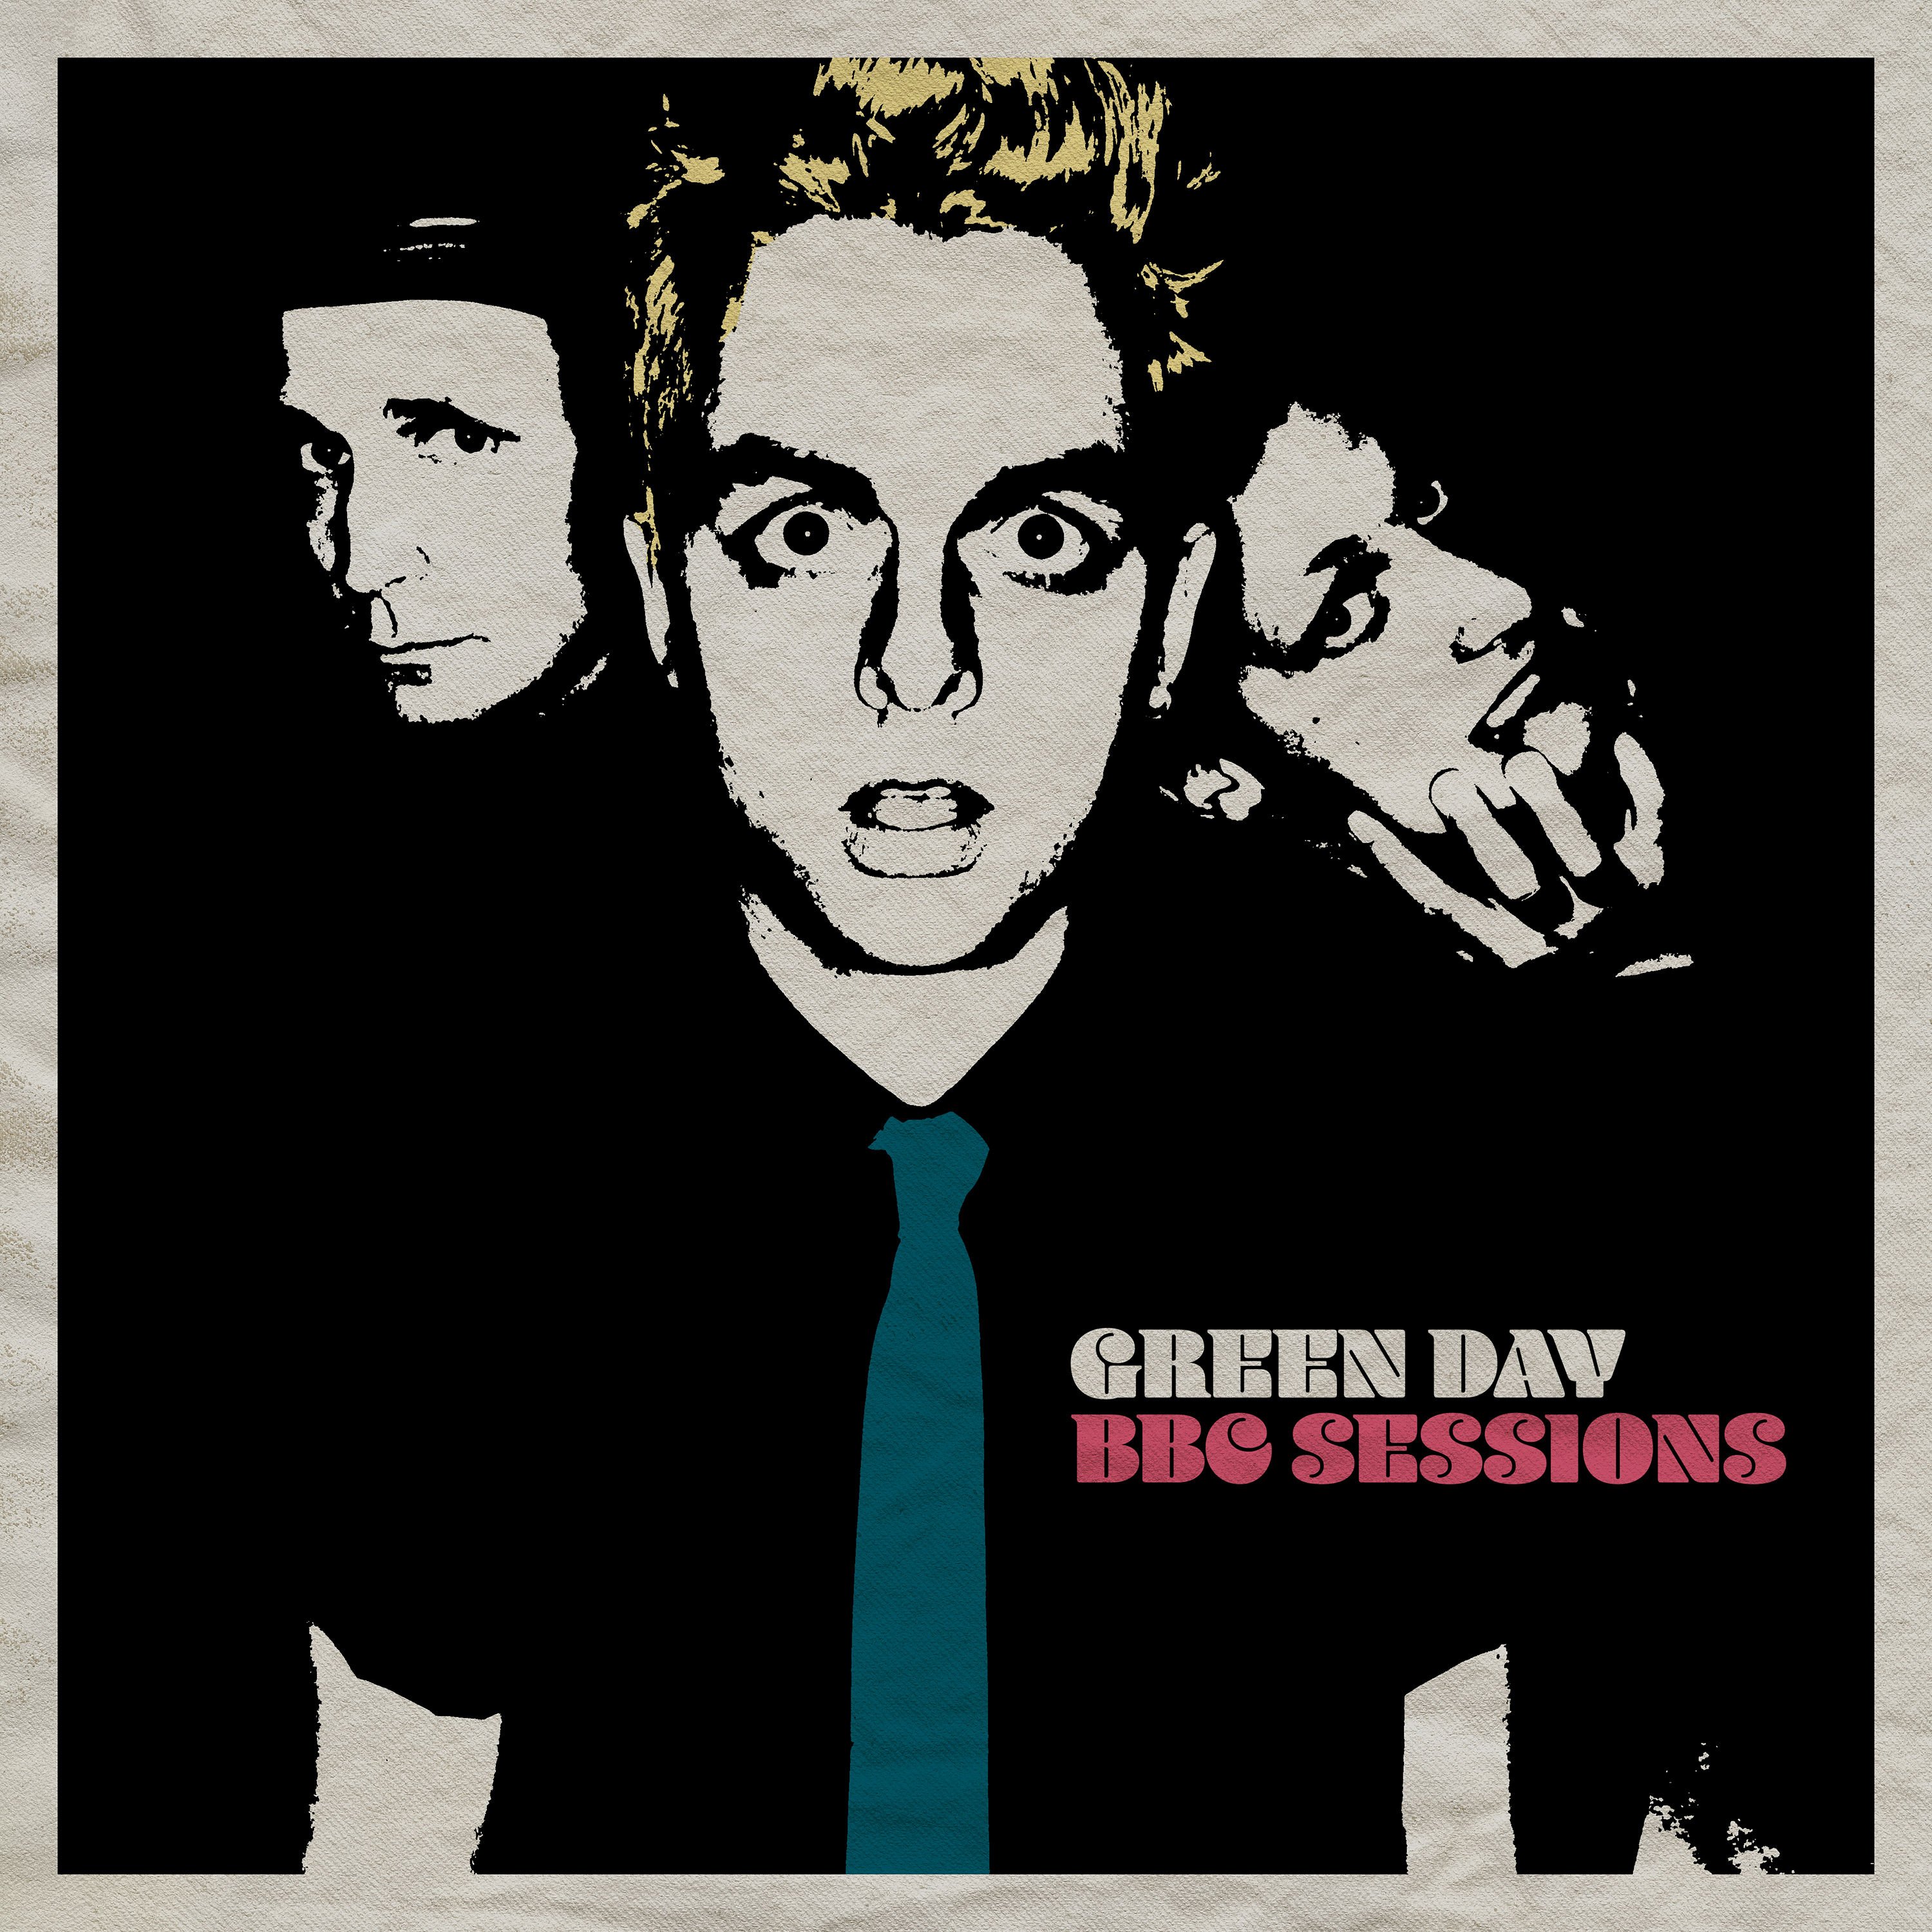 Green Day - BBC Sessions (2021) FLAC Download